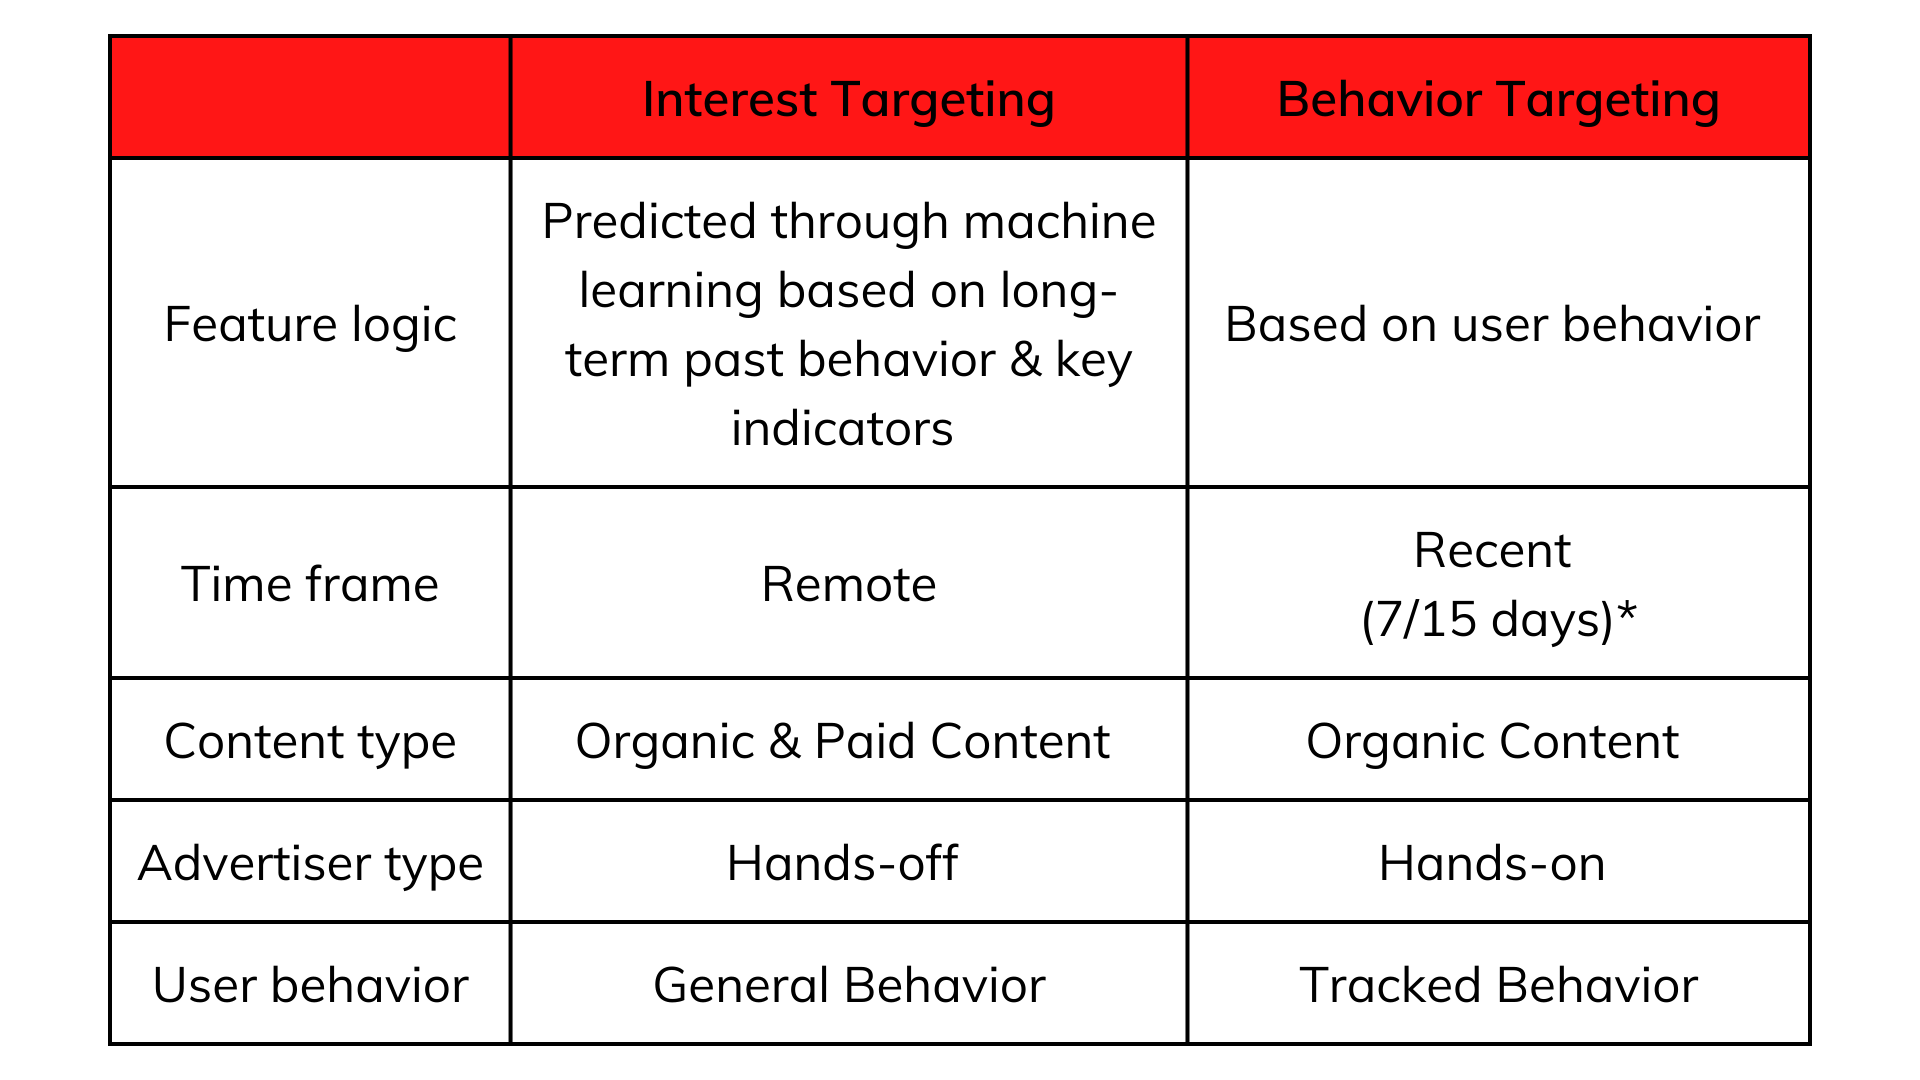 The difference between Interest targeting and Behavior targeting